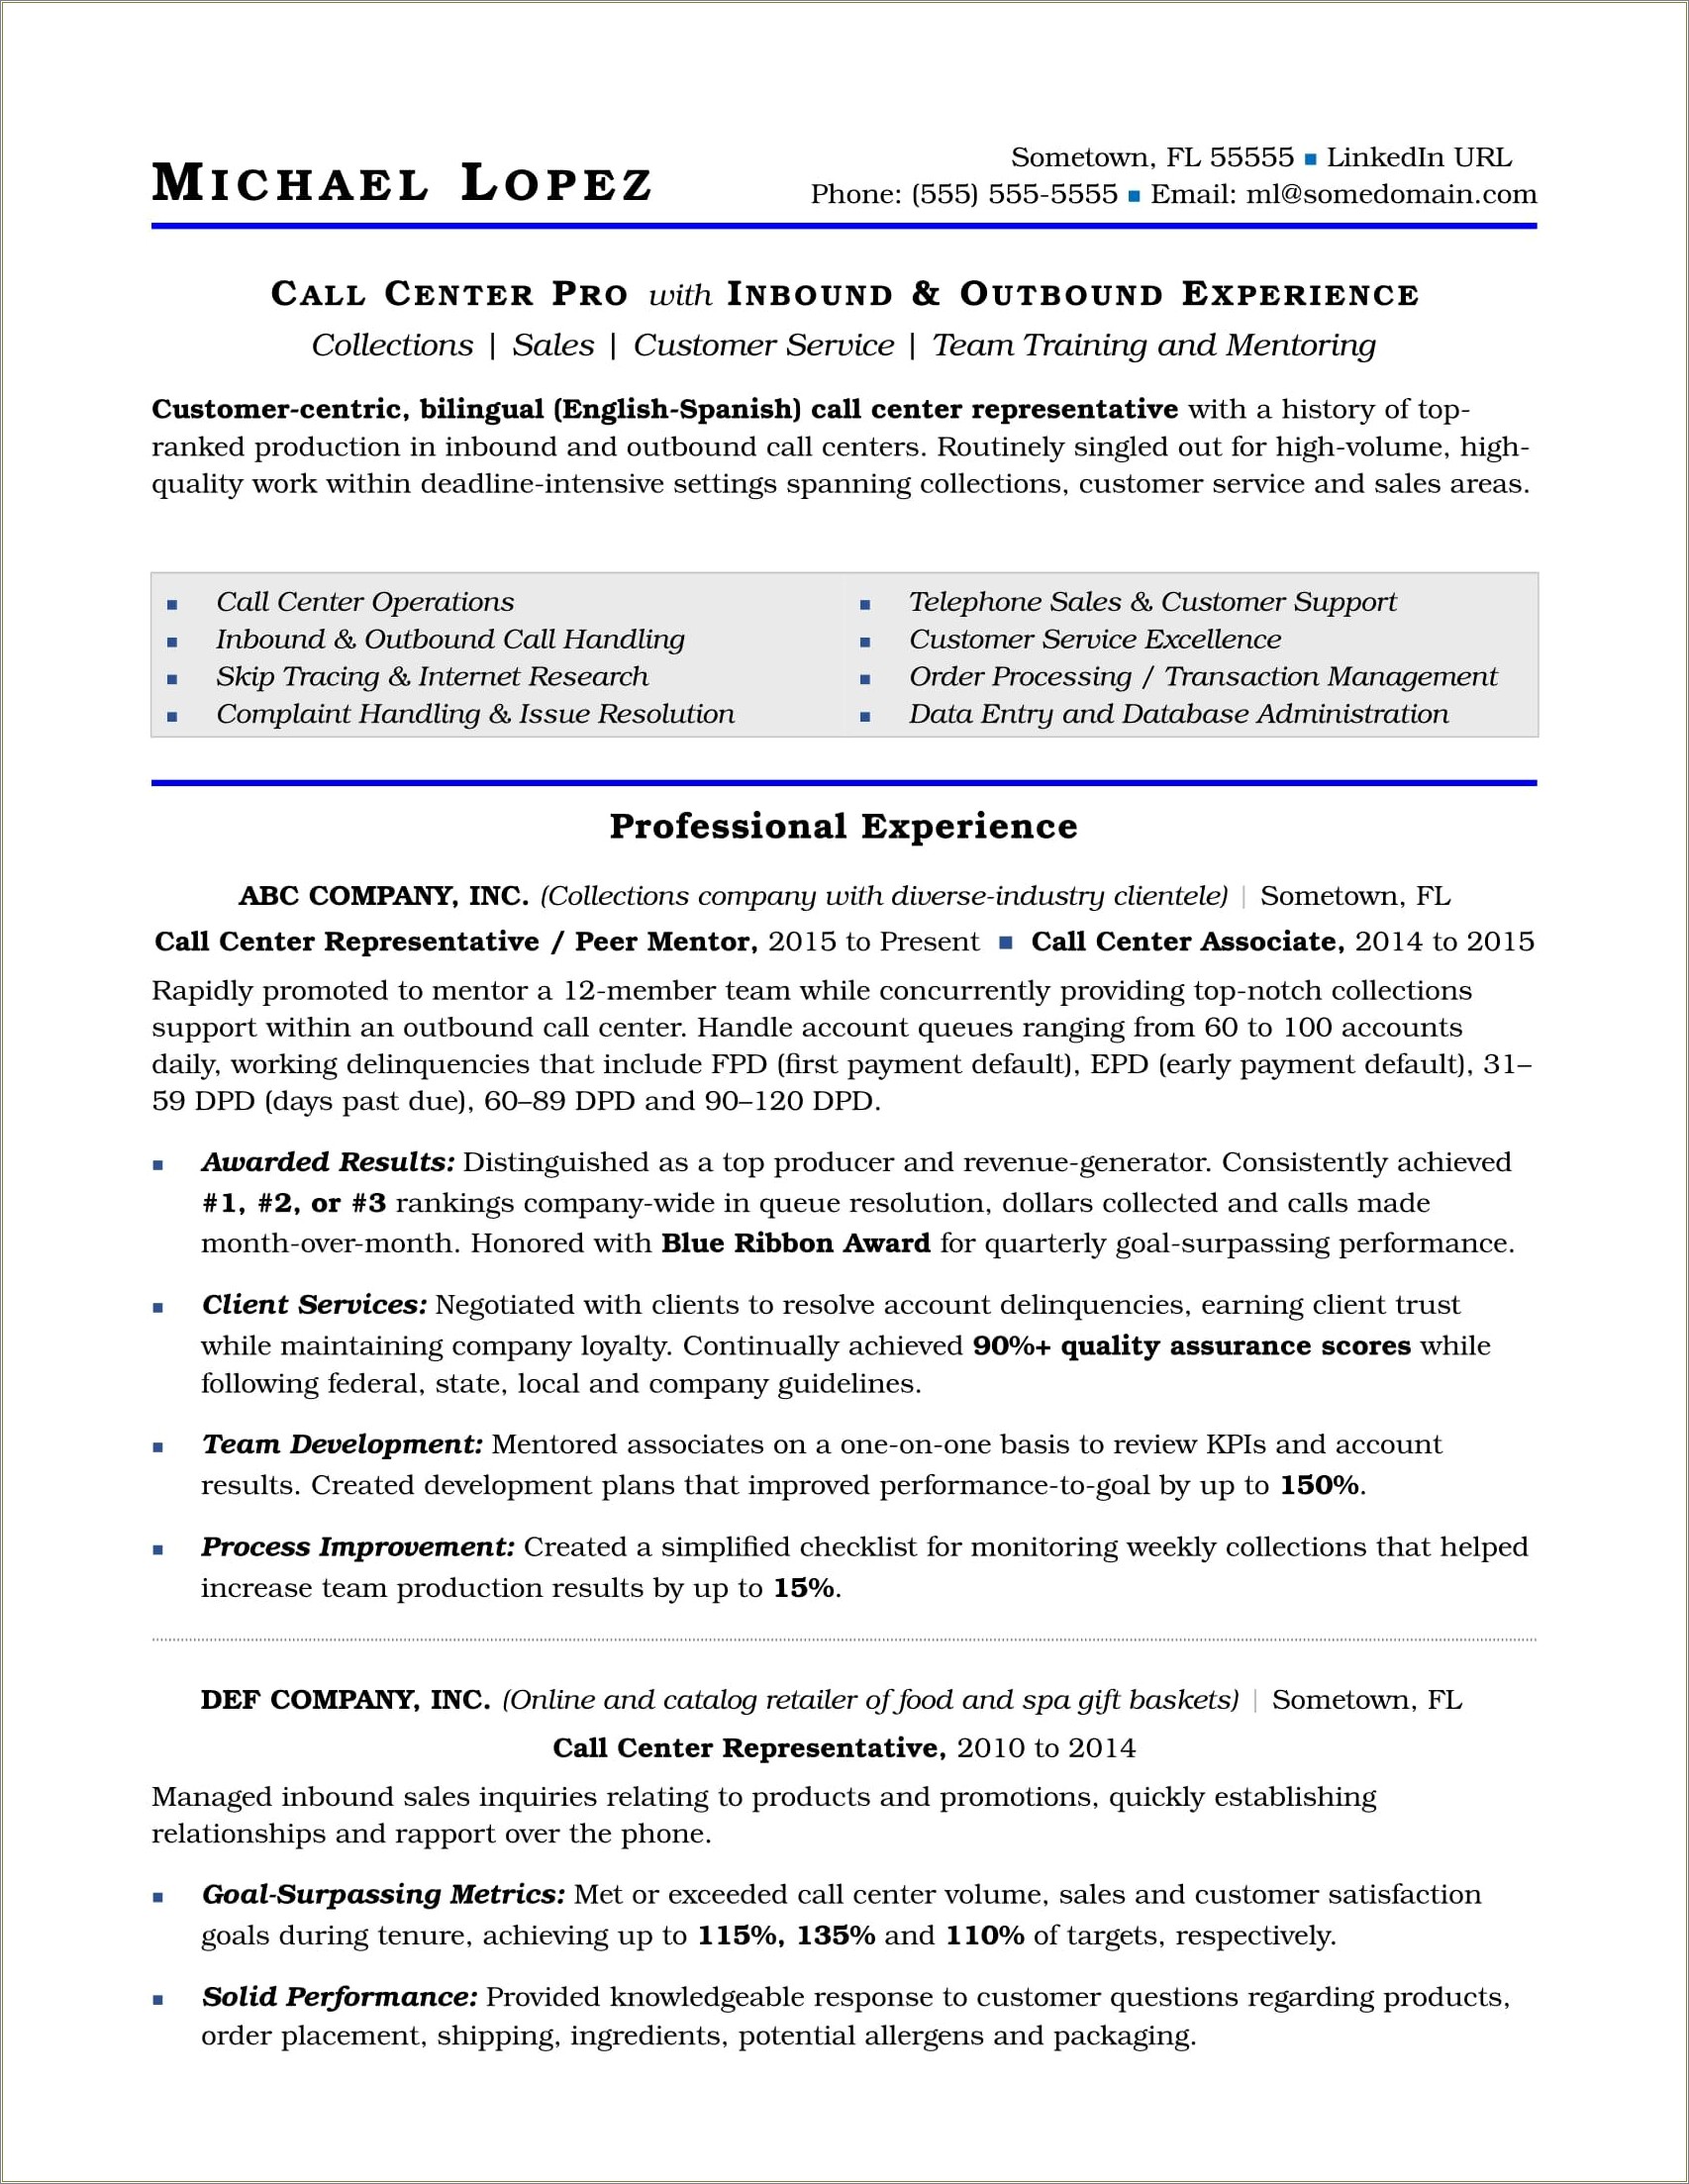 Free Resume Samples For Call Center Agents